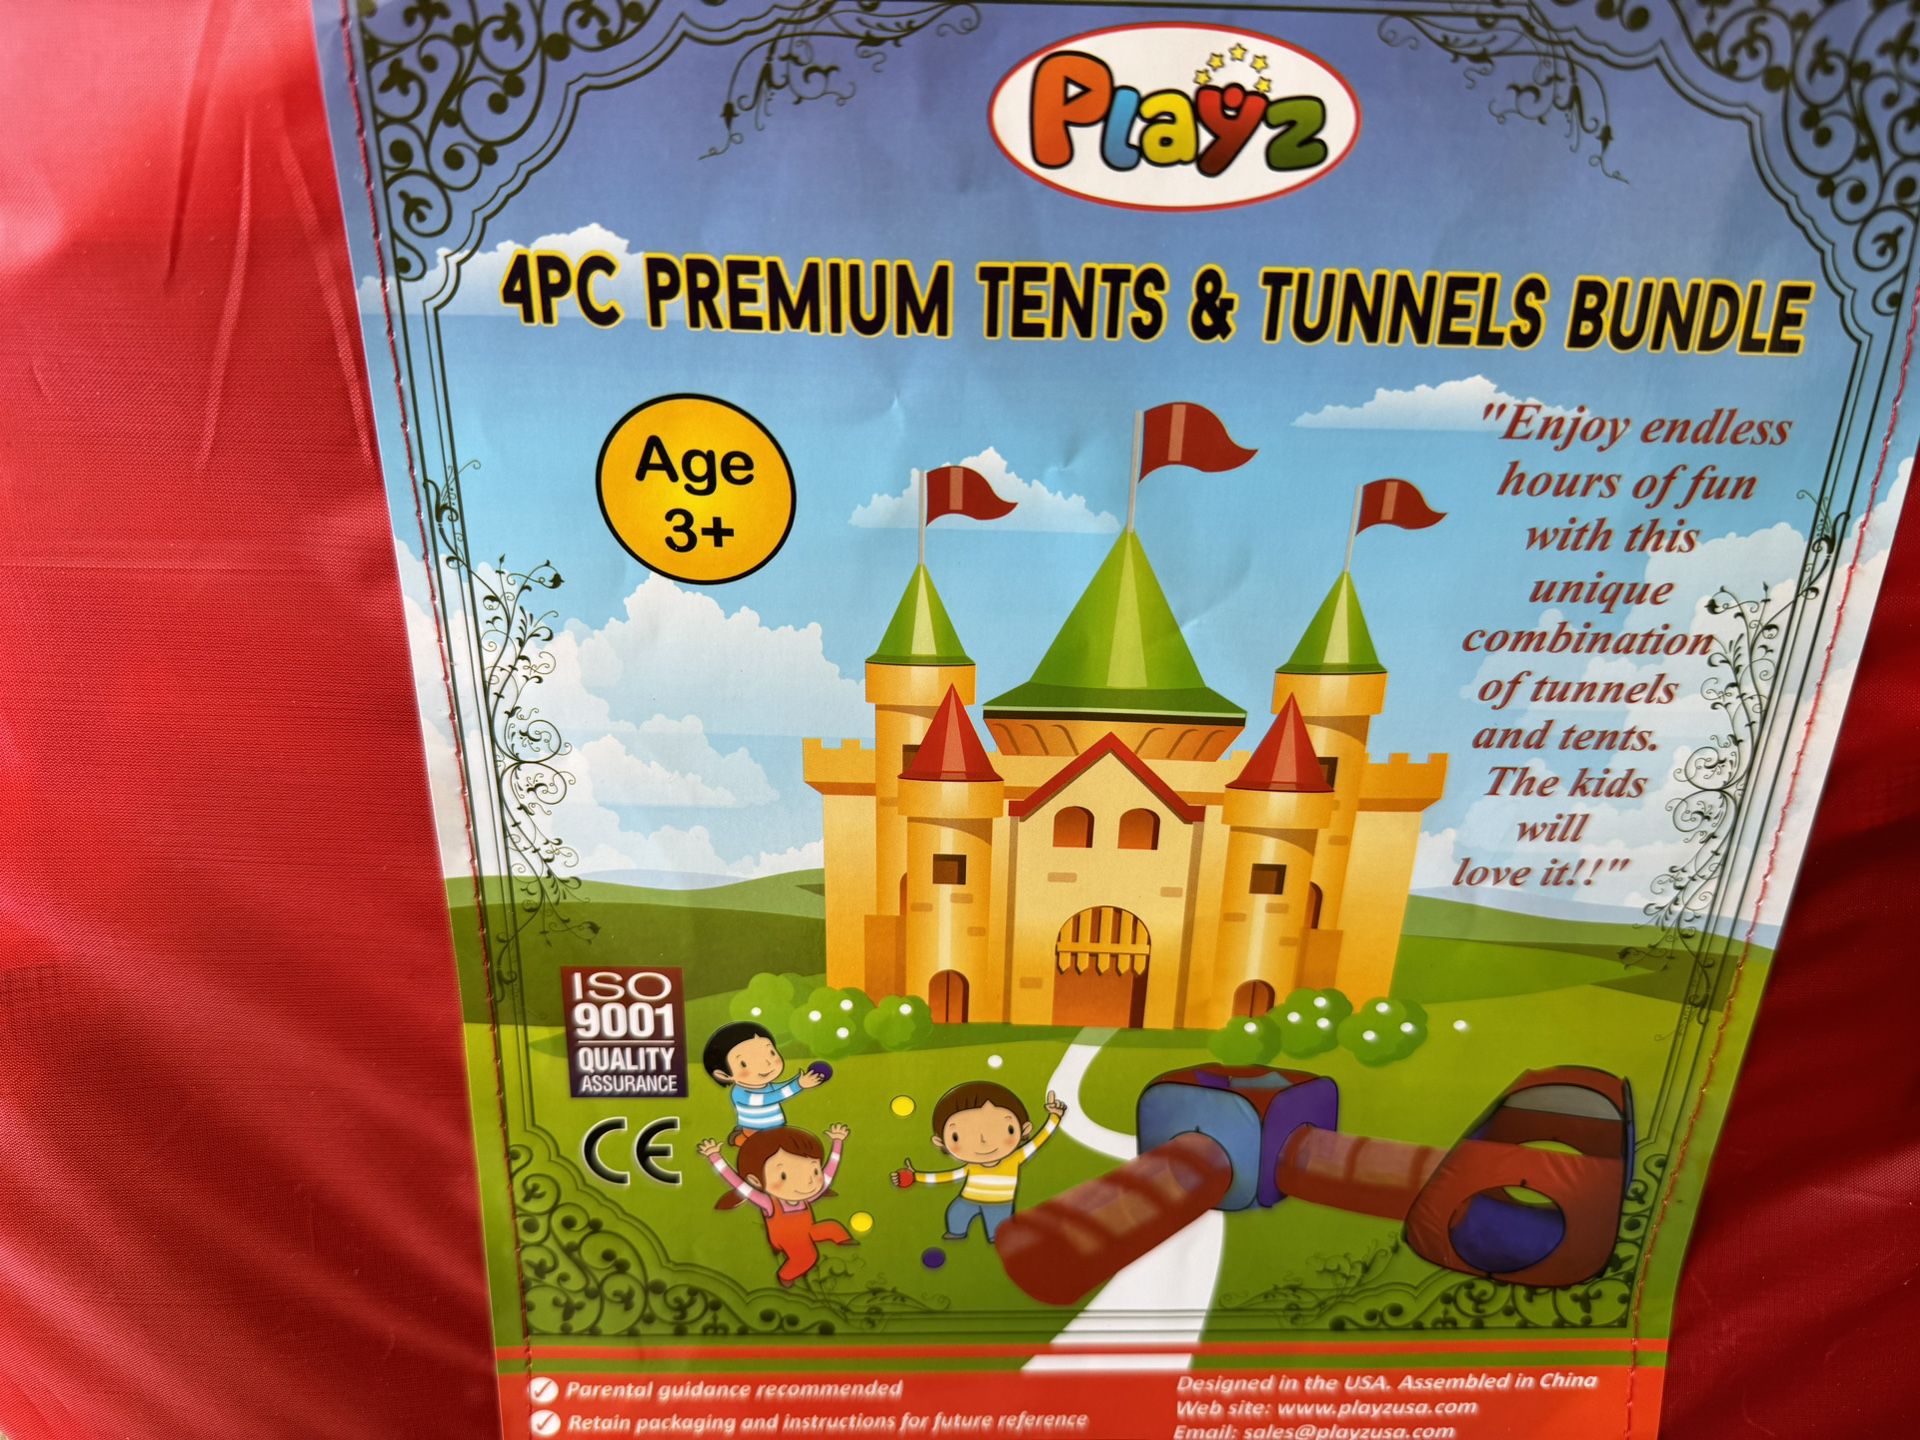 Kiddey Tunnel and Ball Pit Play Tent |Up Toddler Gym Tunnels with Tents for Kids, Toddlers, Infants 